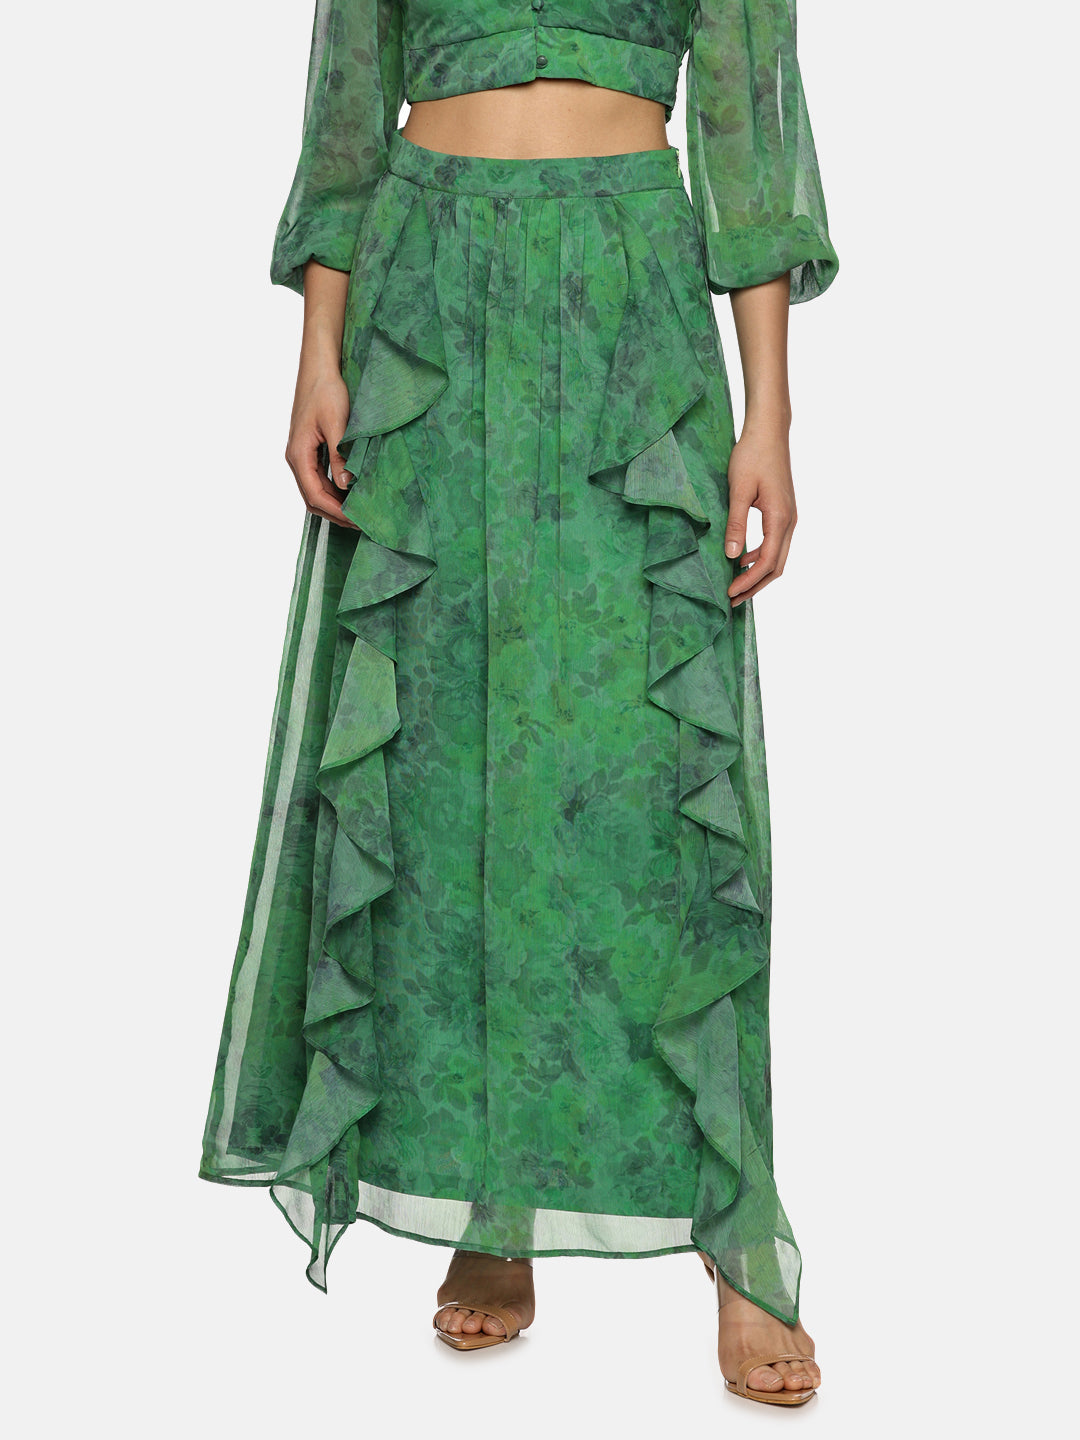 IS.U Floral Green Flare Detail Maxi Skirt